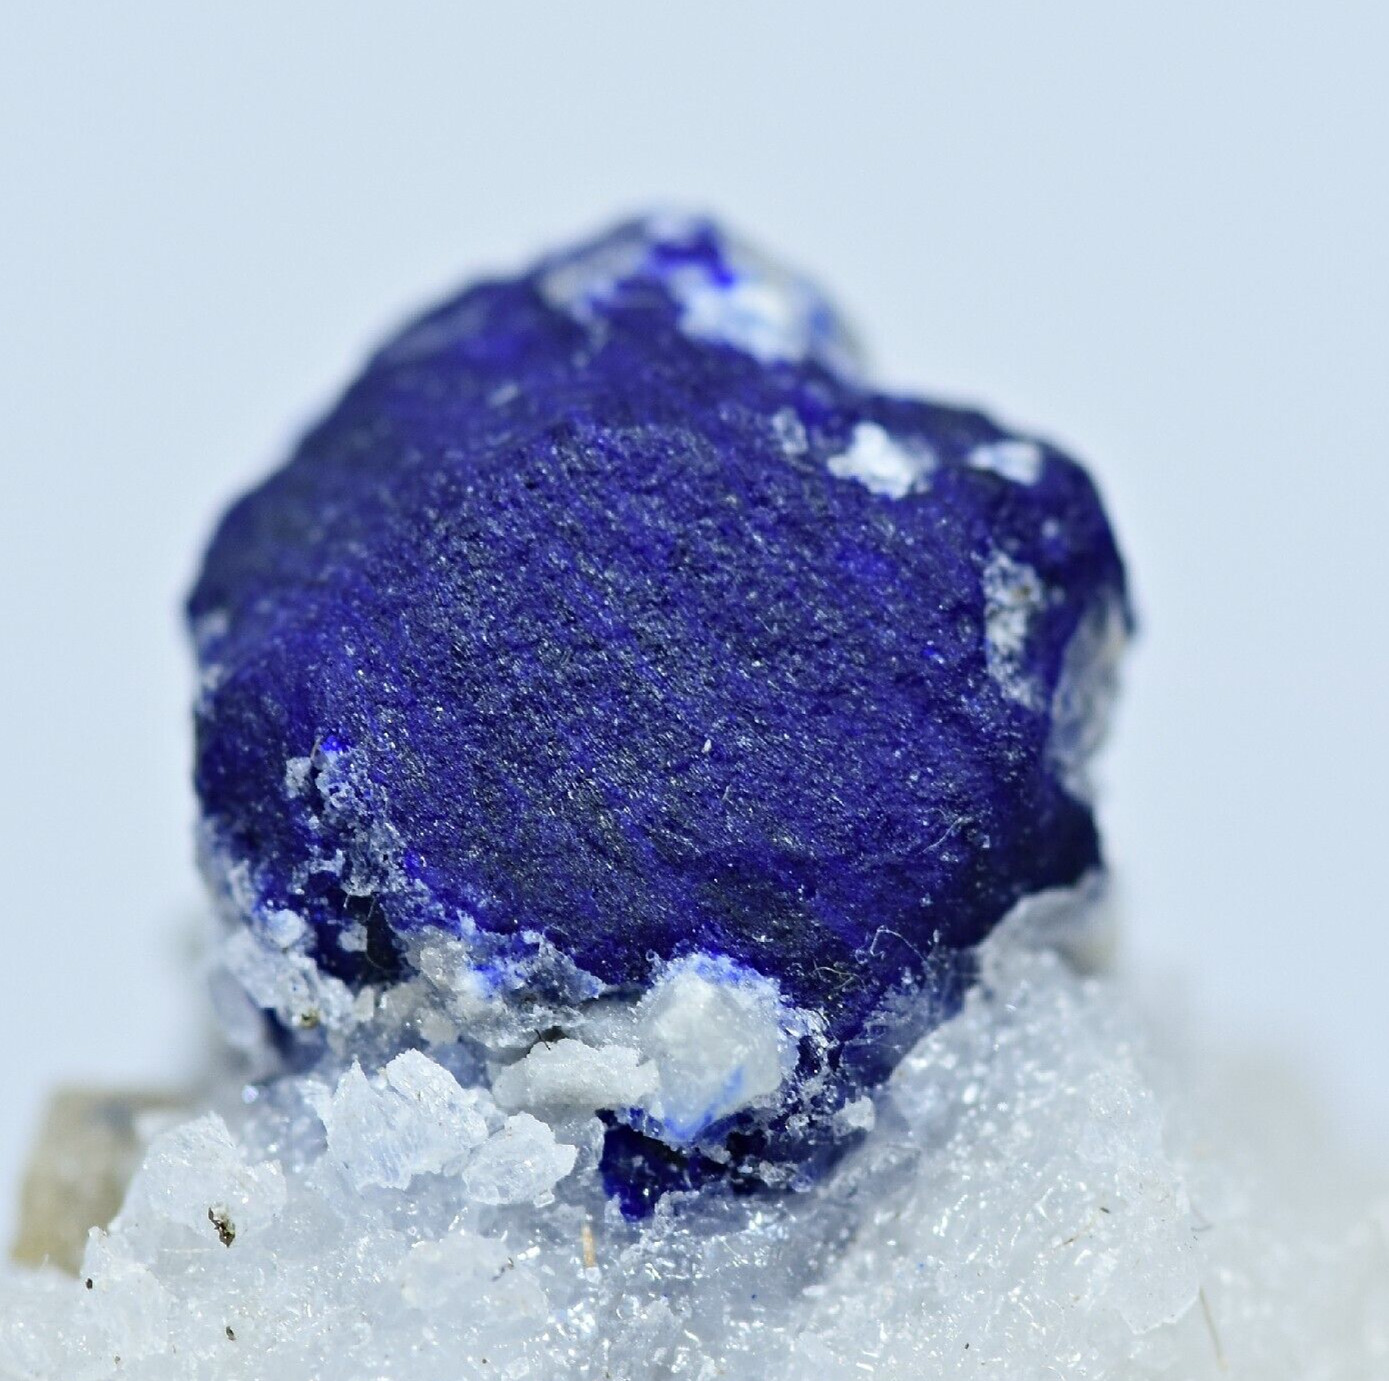 350 CT Top Quality Natural Blue Lazurite Crystal with Mica On Matrix